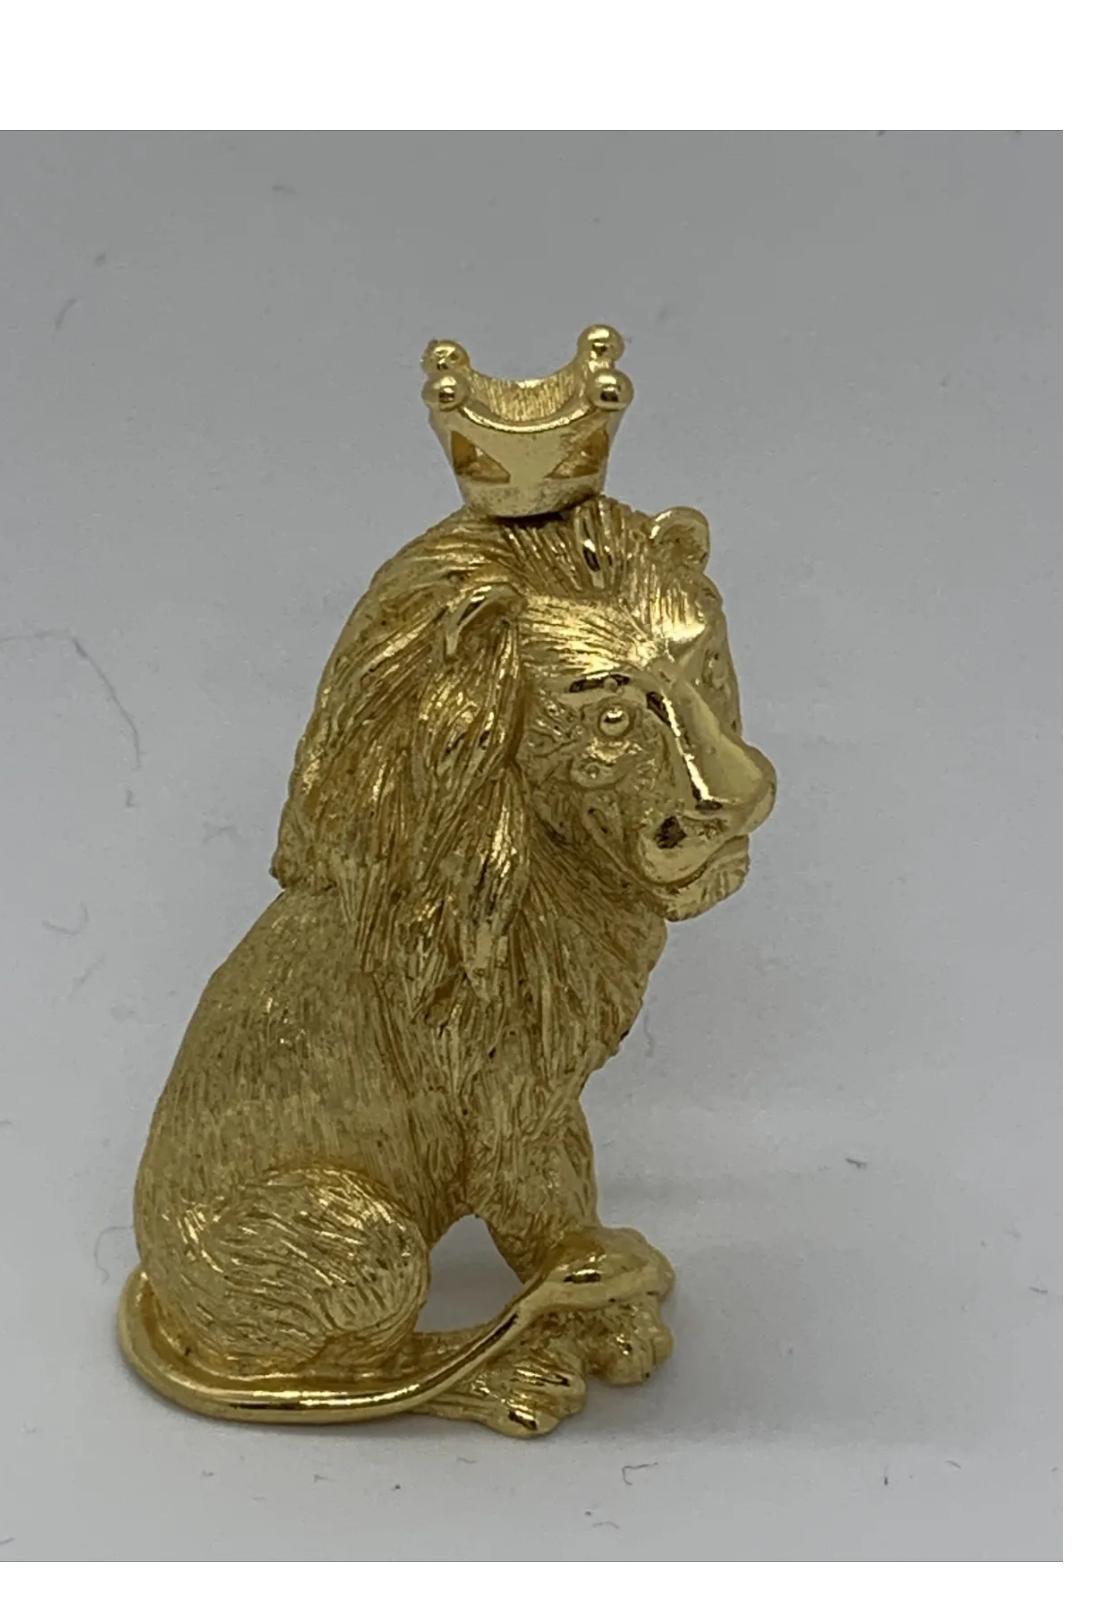 A super king of the jungle lion brooch signed Crown Trifari.
A vintage piece dating from the 1970s.
In a good condition .
Rollover working clasp. Clasp has some light wear of metal. 
Measures 2 inches height x 1 inch measured at the bottom .
A great